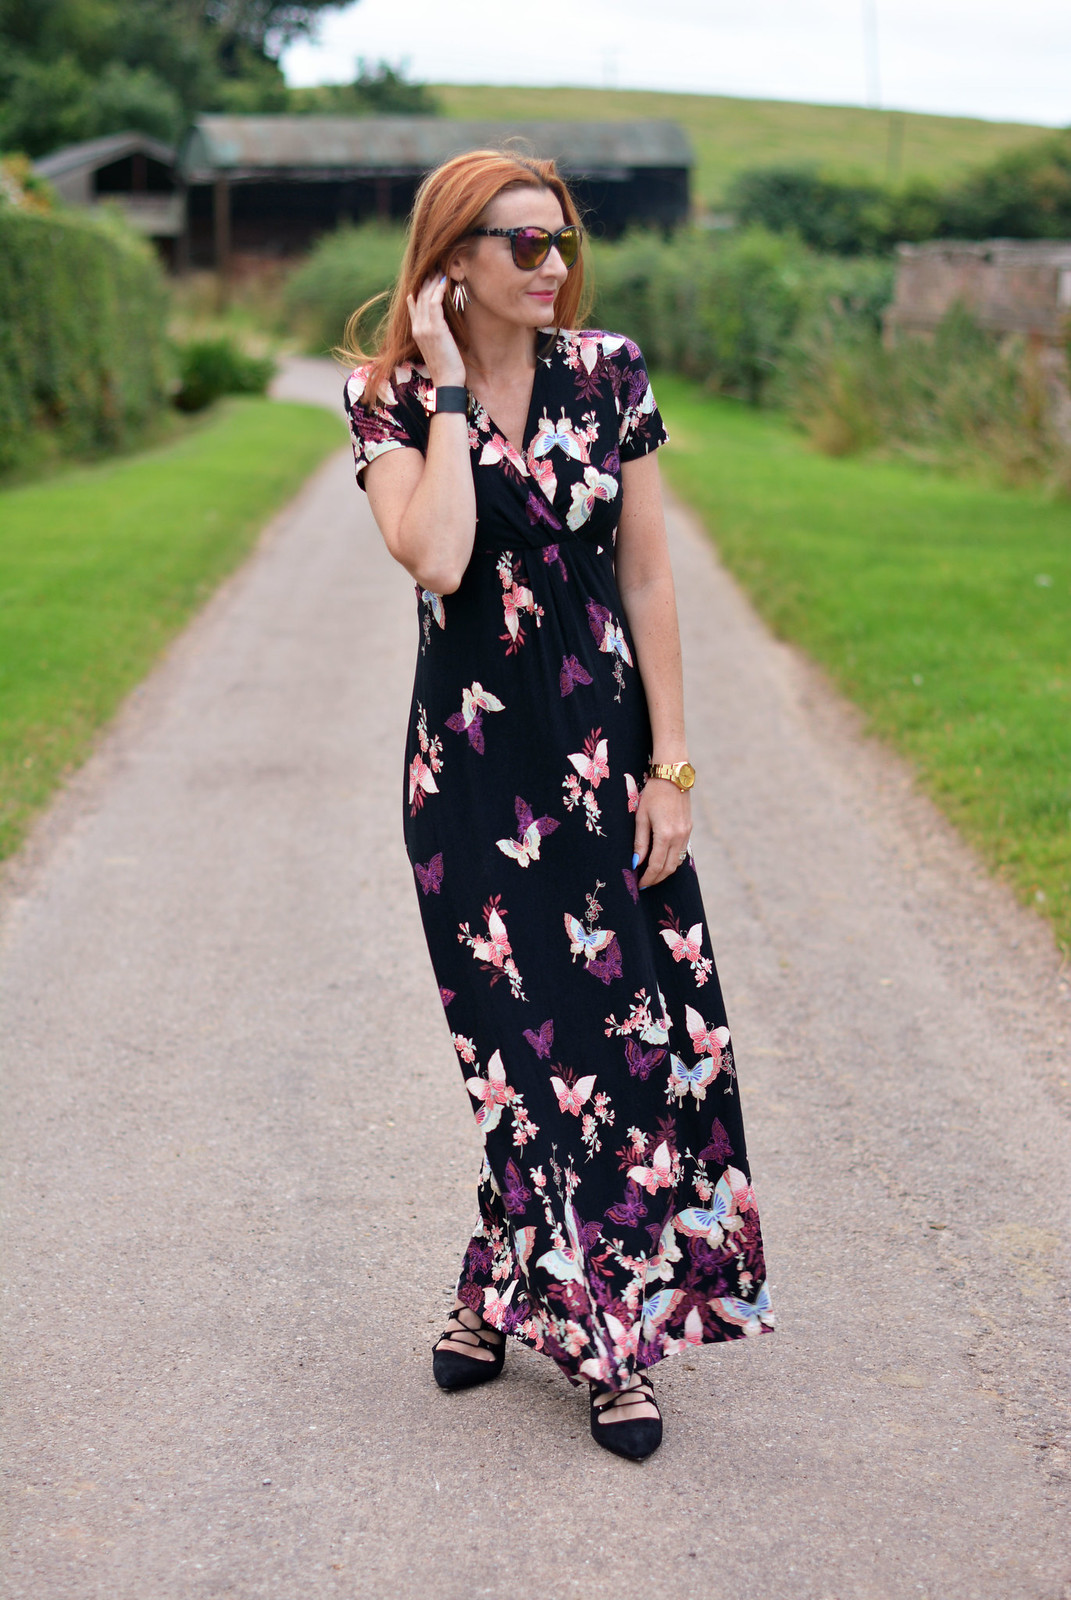 Late summer outfits - Butterfly print maxi dress, black lace-up shoes